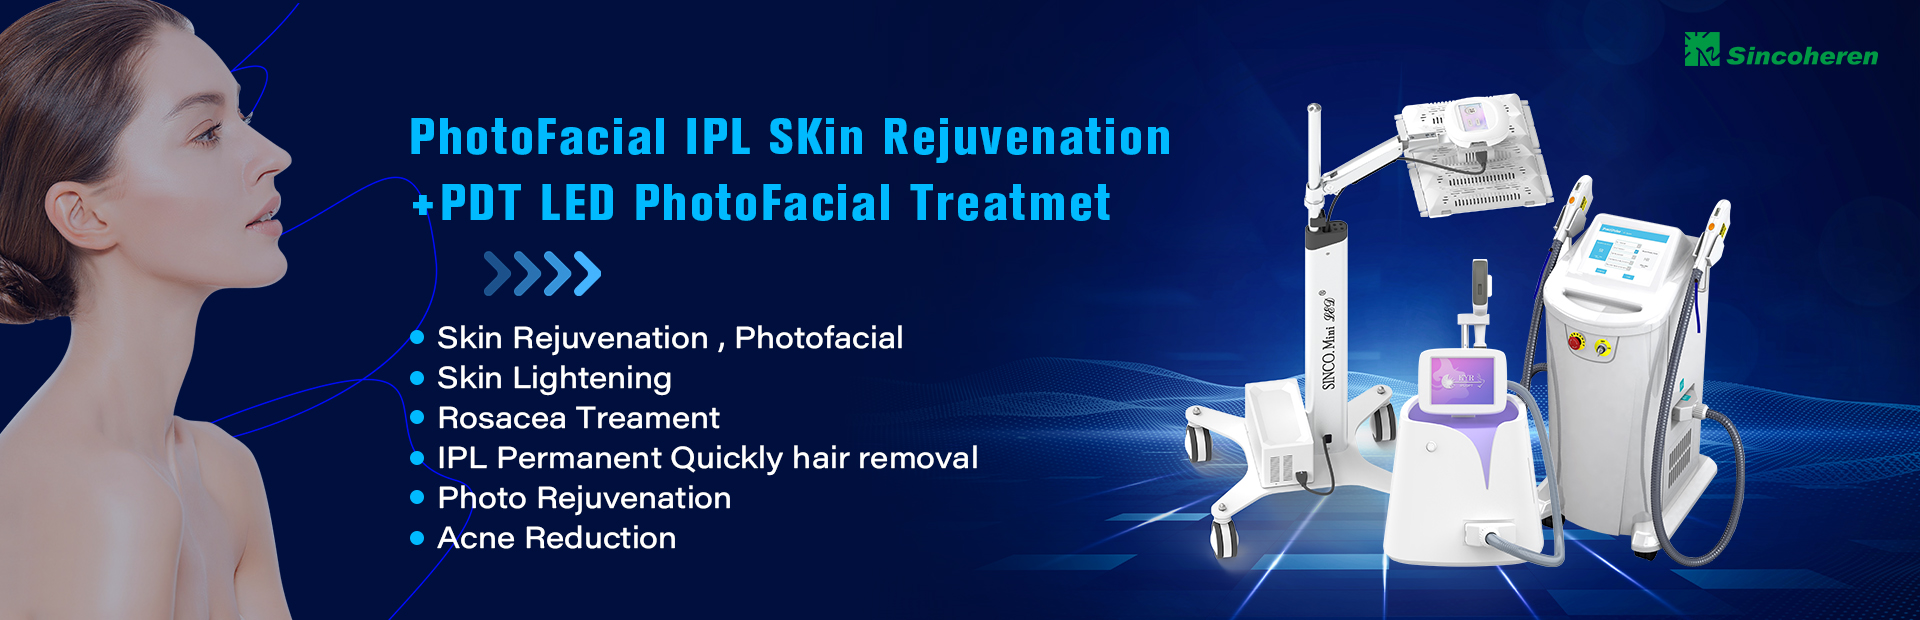 Photofacial therapy system